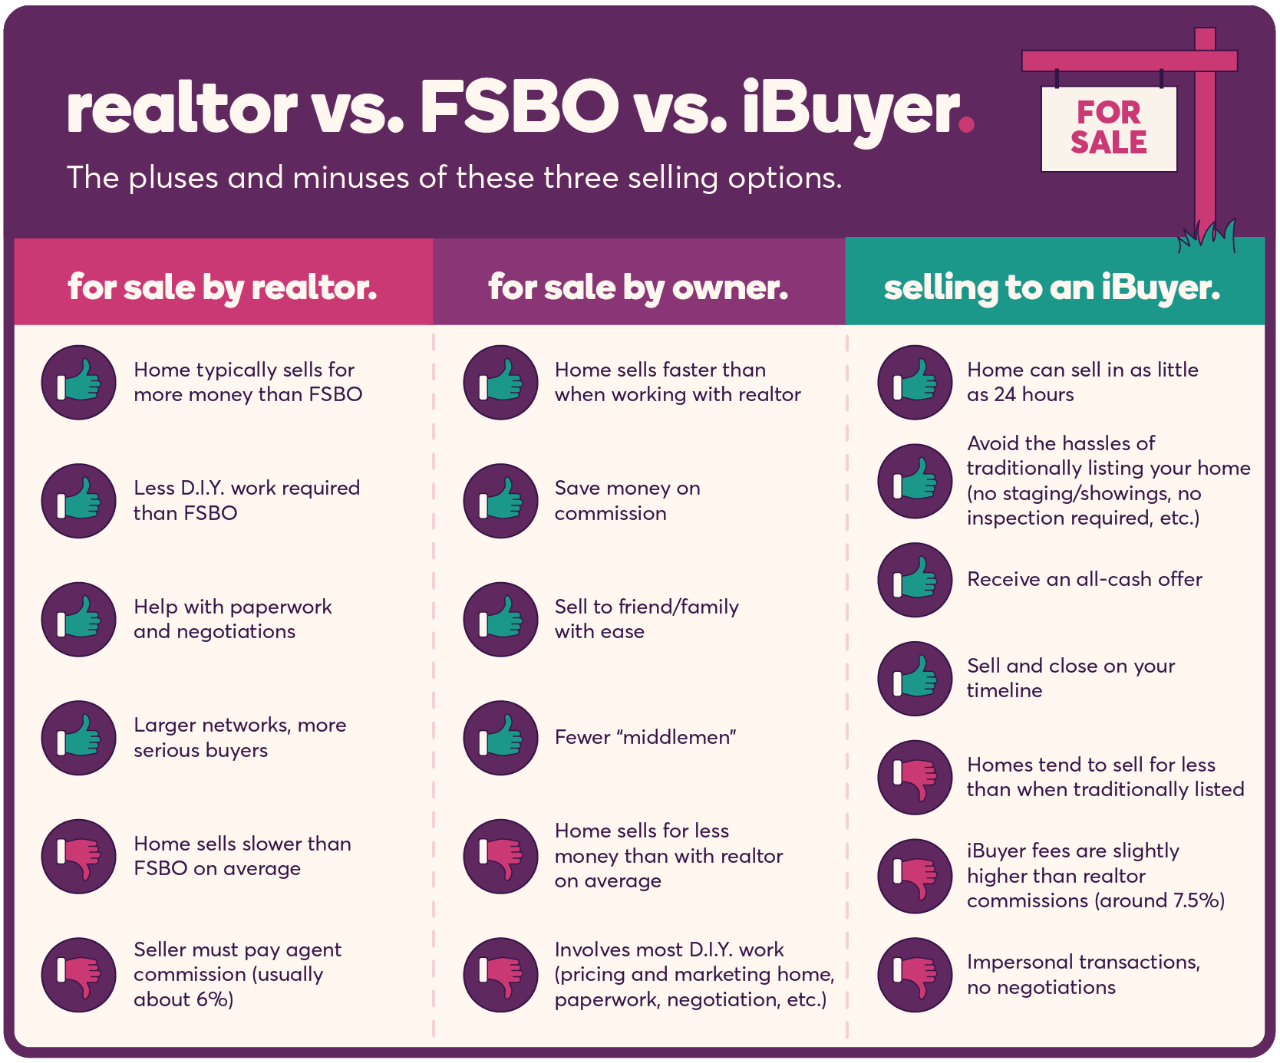 Realtor versus for sale by owner versus iBuyer. The pluses and minuses of these three selling options. When opting to sell with a realtor, the advantages are that a home typically sells for more money than for sale by owner. Less D.I.Y work is required, you have help with paperwork and negotiations and you have access to a larger network and more serious buyers. The disadvantages are that homes sold with realtors on average sell slower than for sale by owners and sellers must pay the agents commission, usually about six percent. When opting to go the for sale by owner route, the advantages are that a home sells faster than working with a realtor, you save money on commission, you can sell to friends or family with ease and there are fewer middlemen. The disadvantages are that for sale by owner homes on average sell for less money than with a realtor and it involves a lot of D.I.Y work, such as pricing and marketing the home, doing paperwork, negotiations, etcetera. When opting to sell to an iBuyer, the advantages are that a home can sell in as little as 24 hours, you avoid the hassles of traditionally listing your home (like staging, showings, inspections, etcetera), you receive an all-cash offer, and you can sell and close on your own timeline. The disadvantages are that homes tend to sell for less than when traditionally listed, iBuyer fees are slightly higher than realtor commissions (around 7.5 percent), and the transactions are impersonal, so there’s no negotiations. 